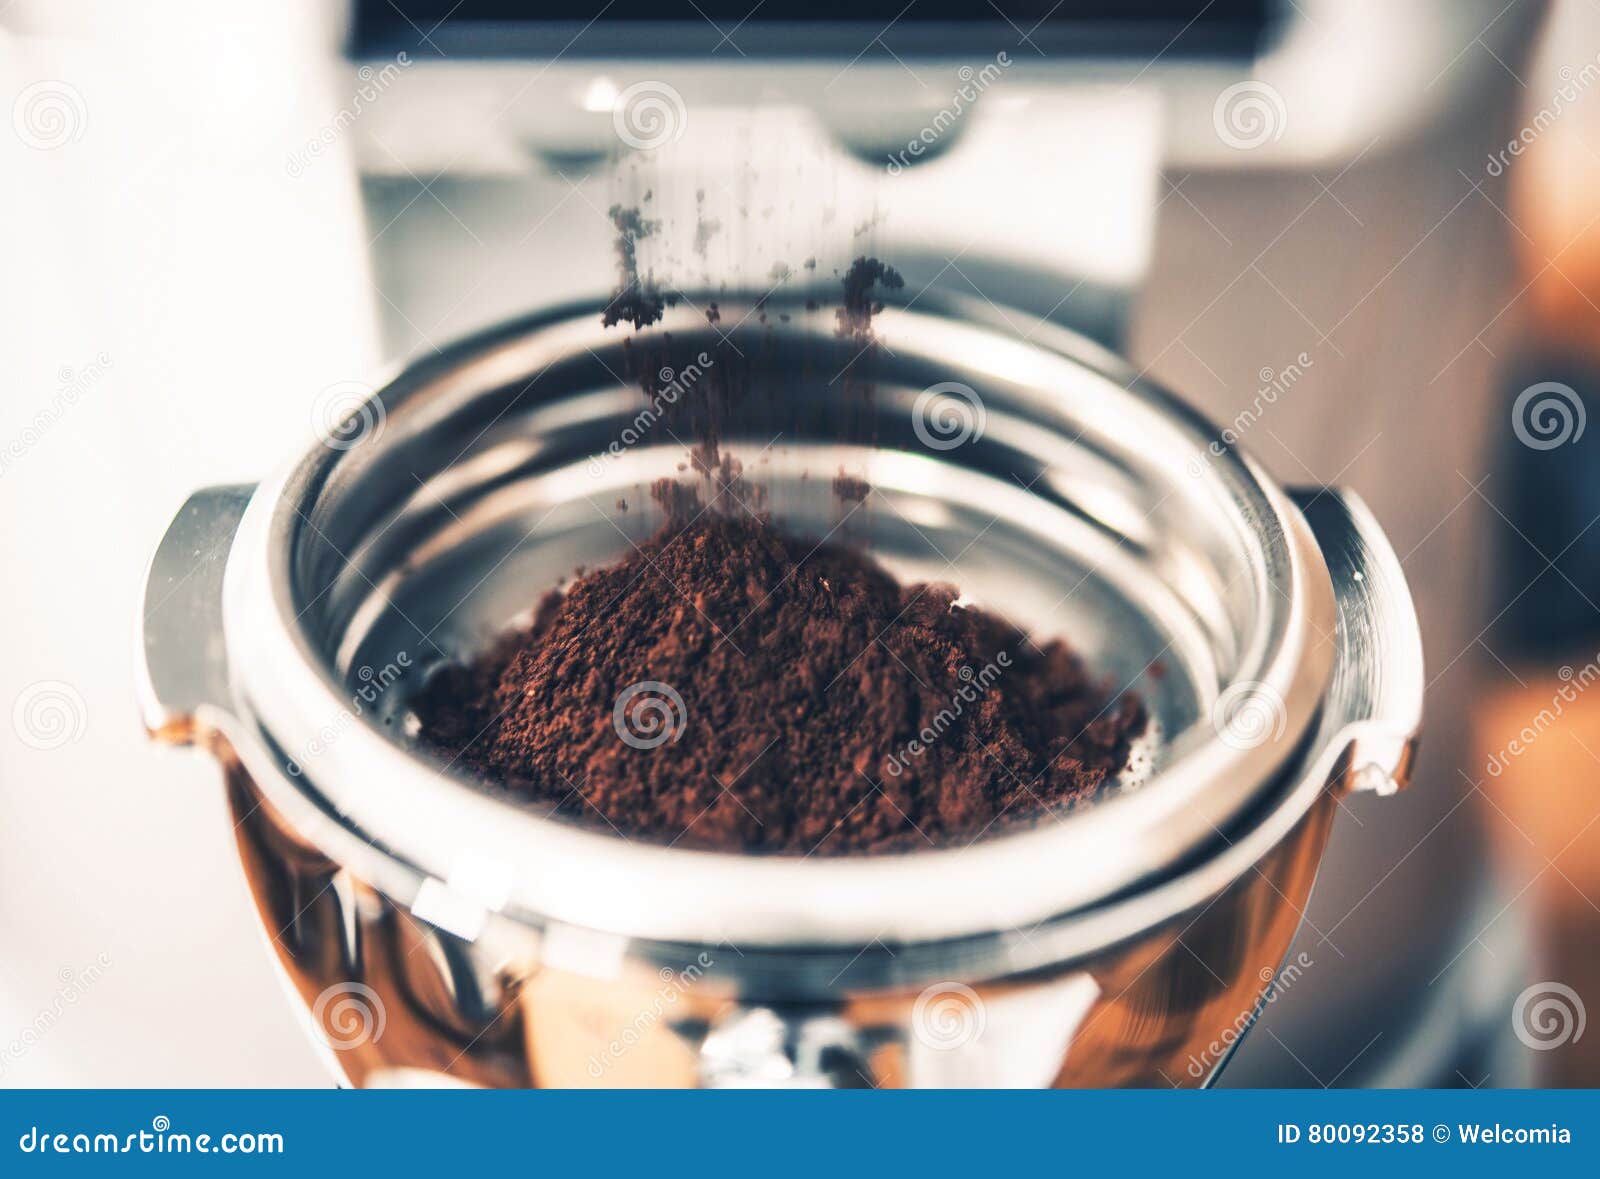 filing portafilter with coffee